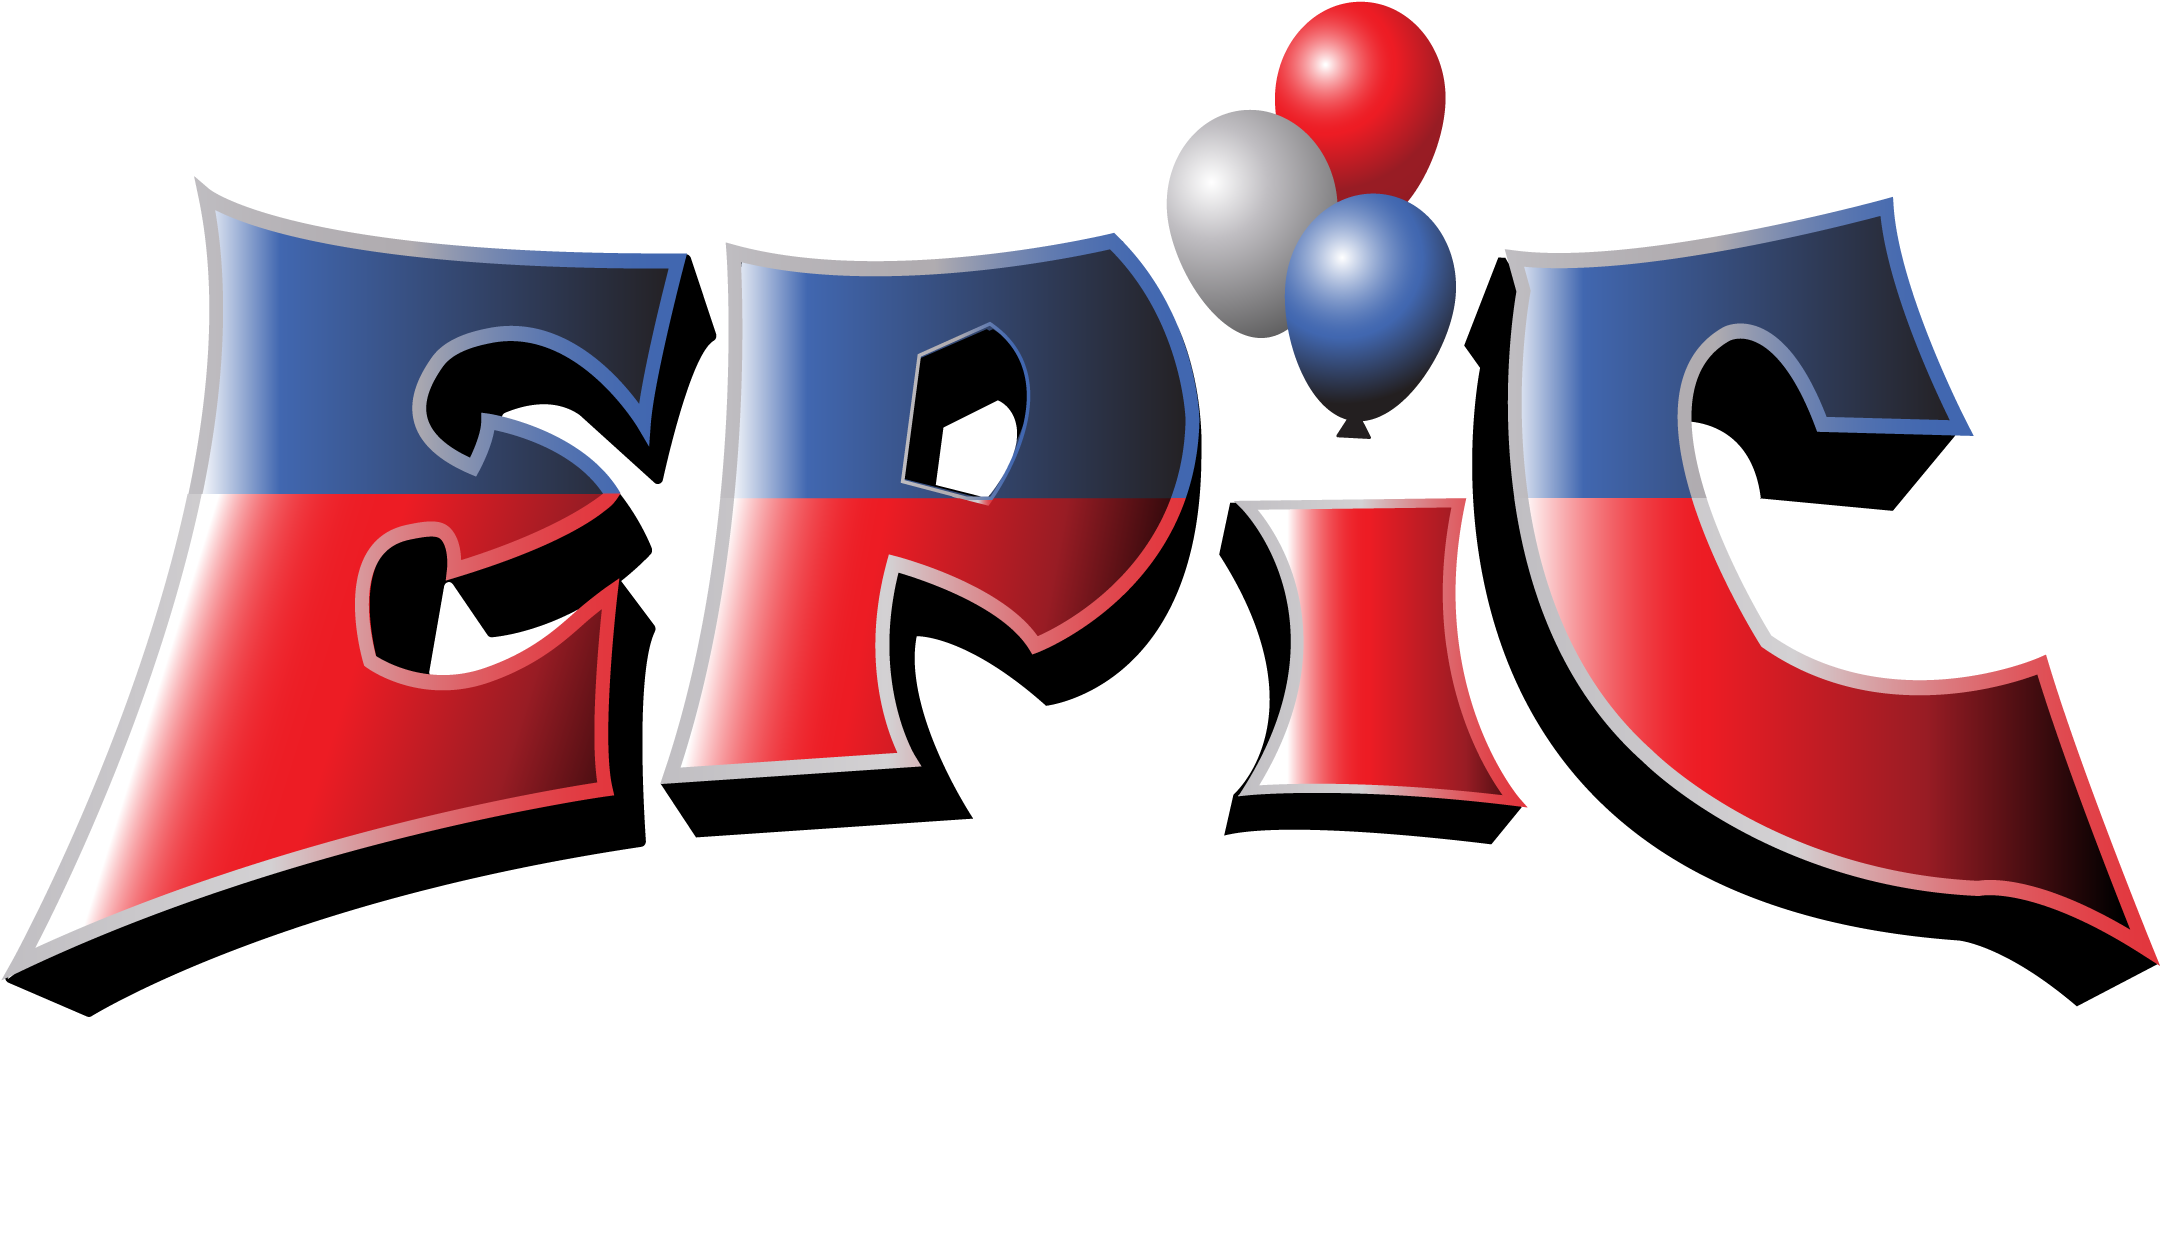 Whether It's A Birthday Party, Corporate Events, School - Whether It's A Birthday Party, Corporate Events, School (2700x1800)